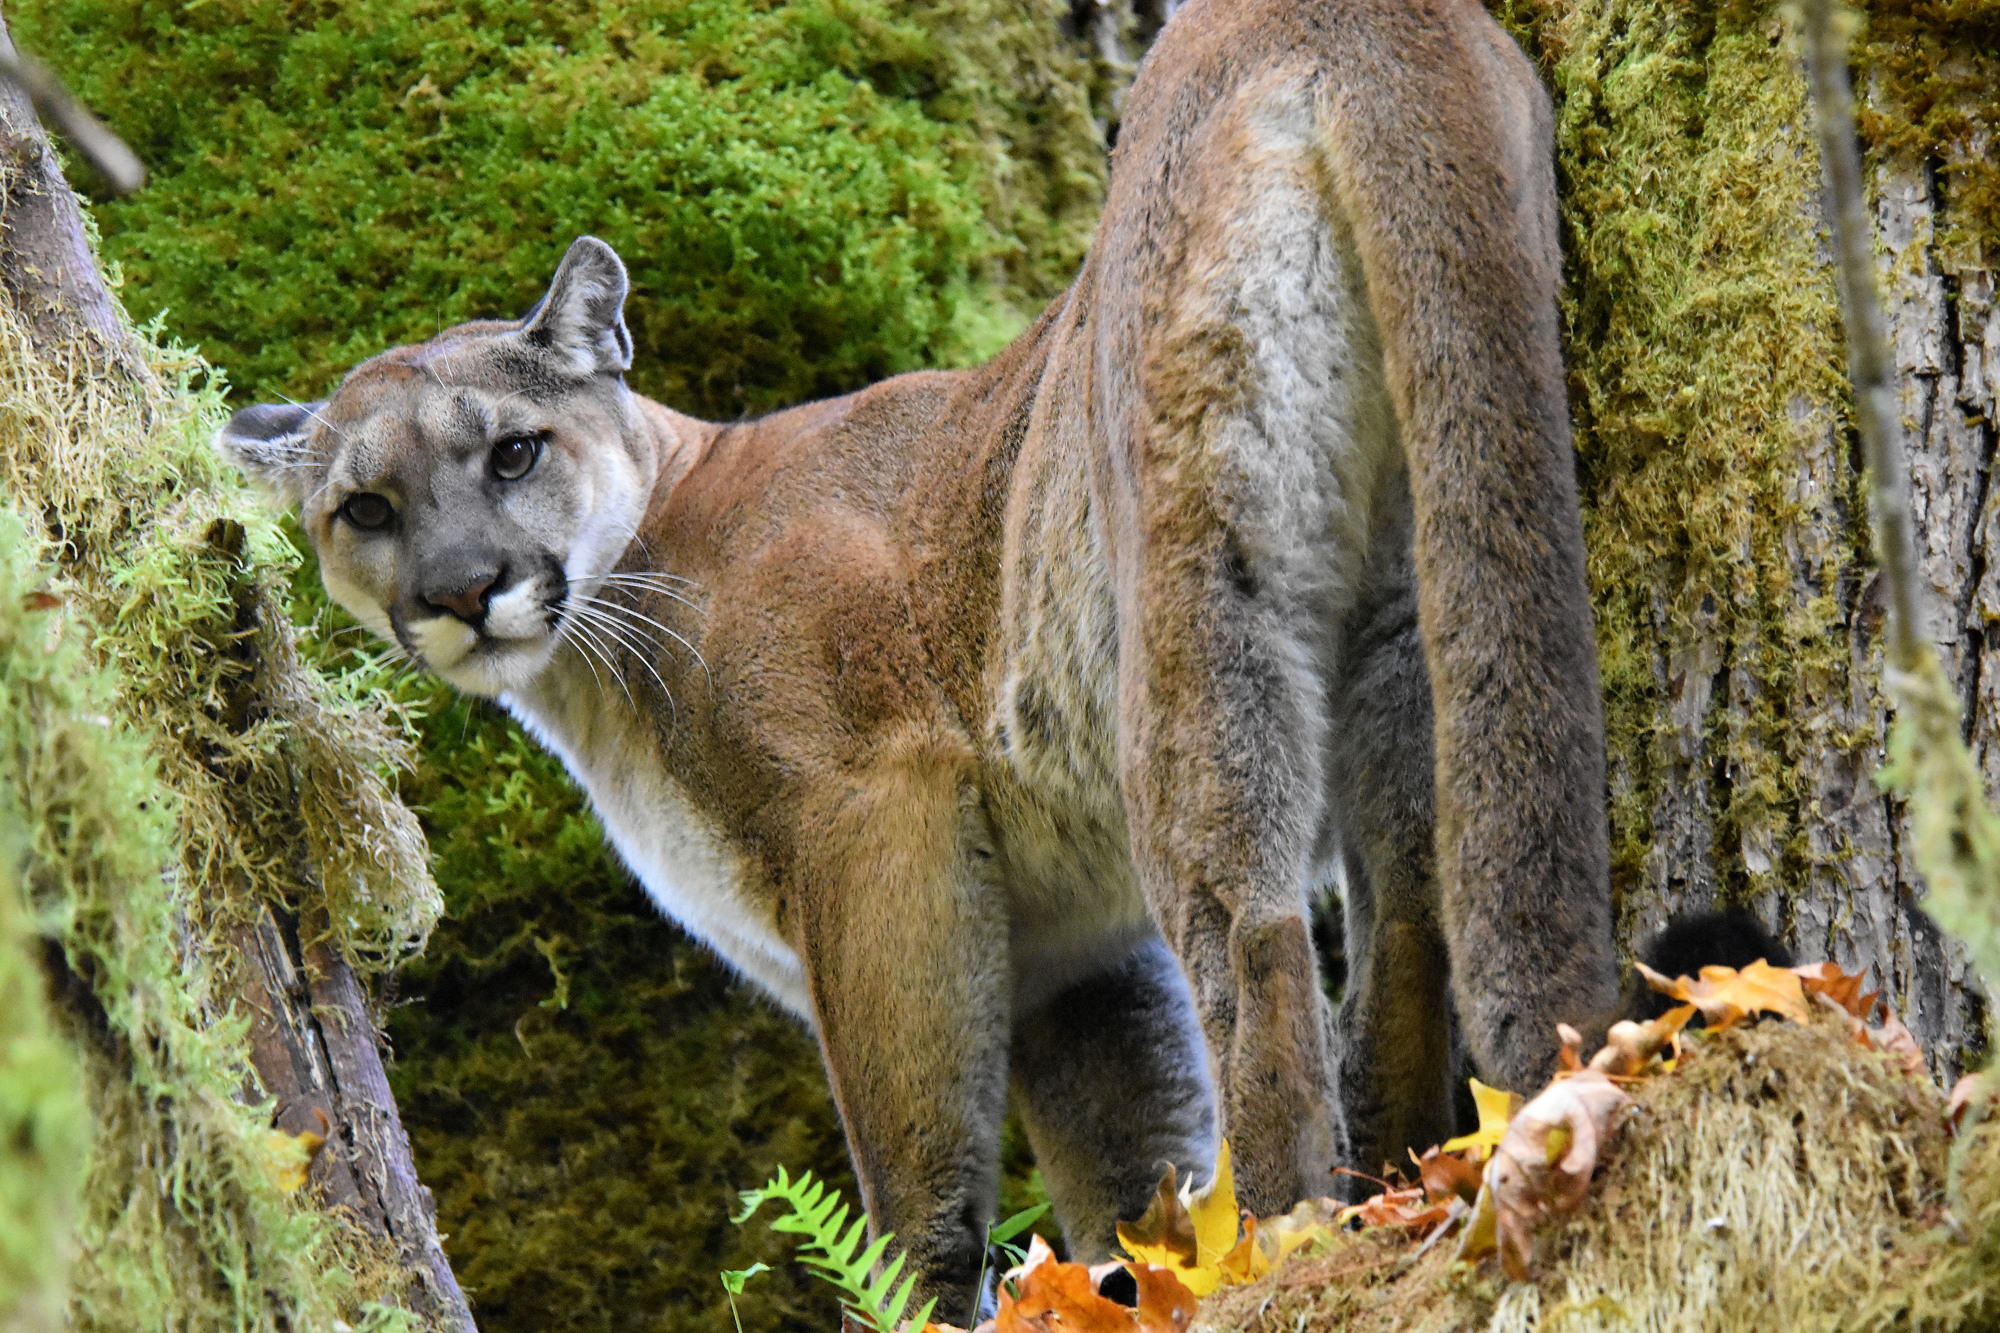 "Cougar looking back at photographer in the wild"